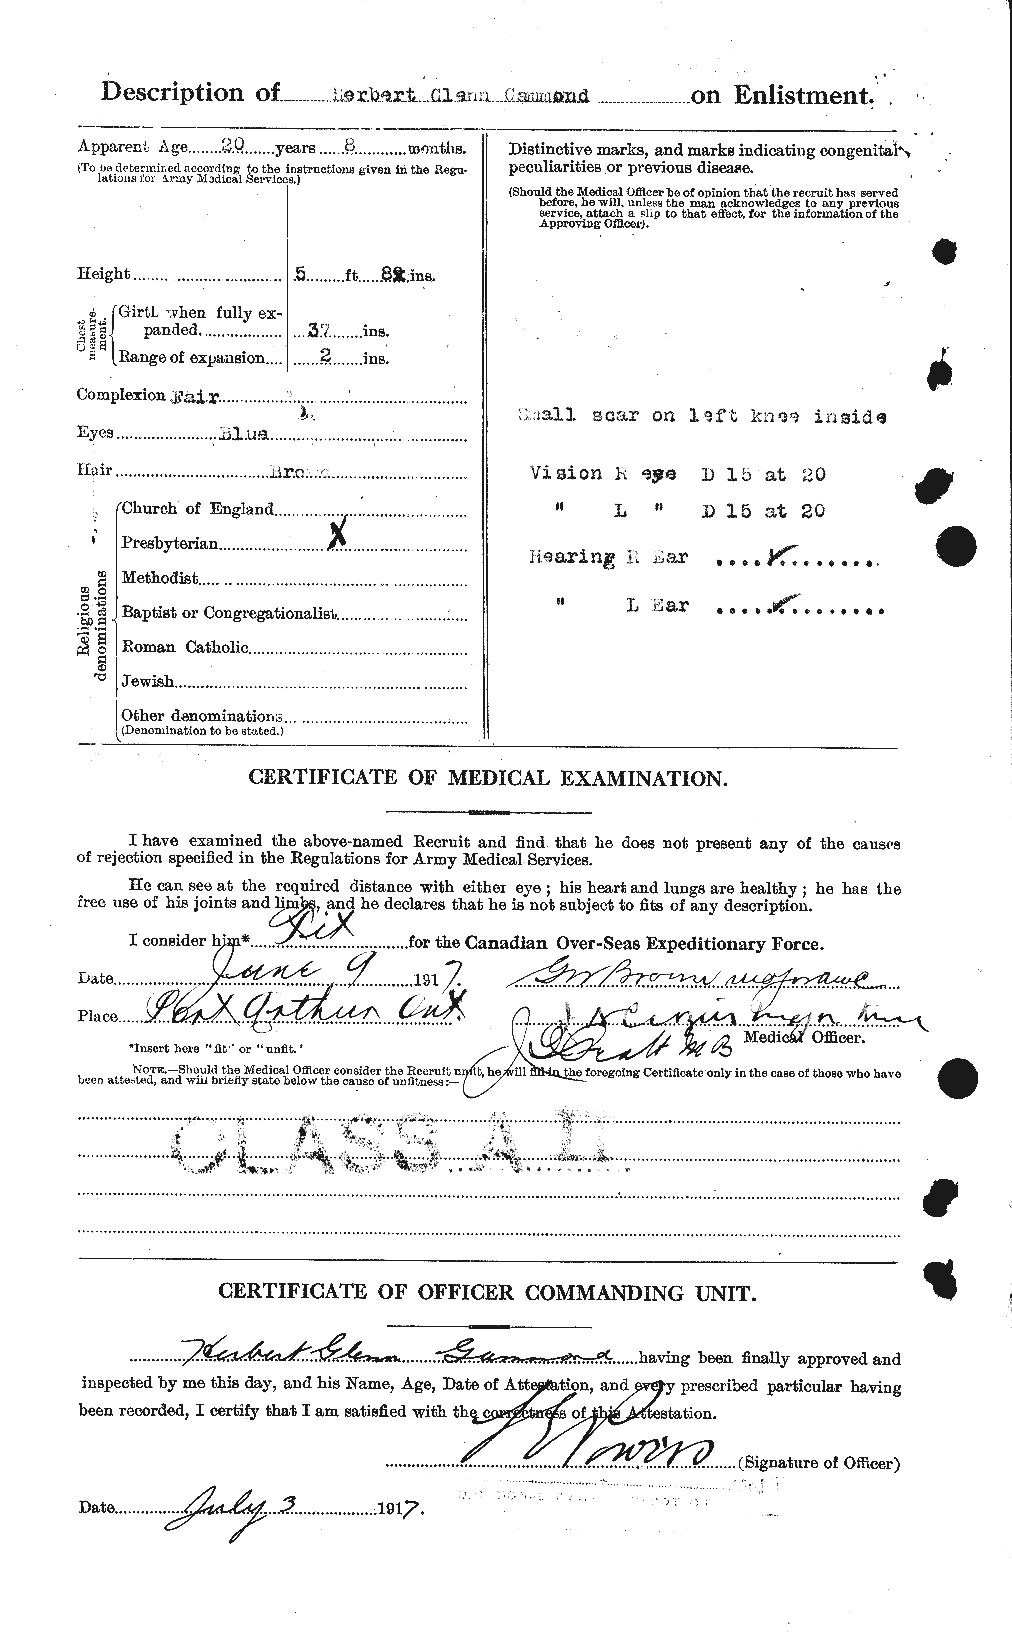 Personnel Records of the First World War - CEF 343090b